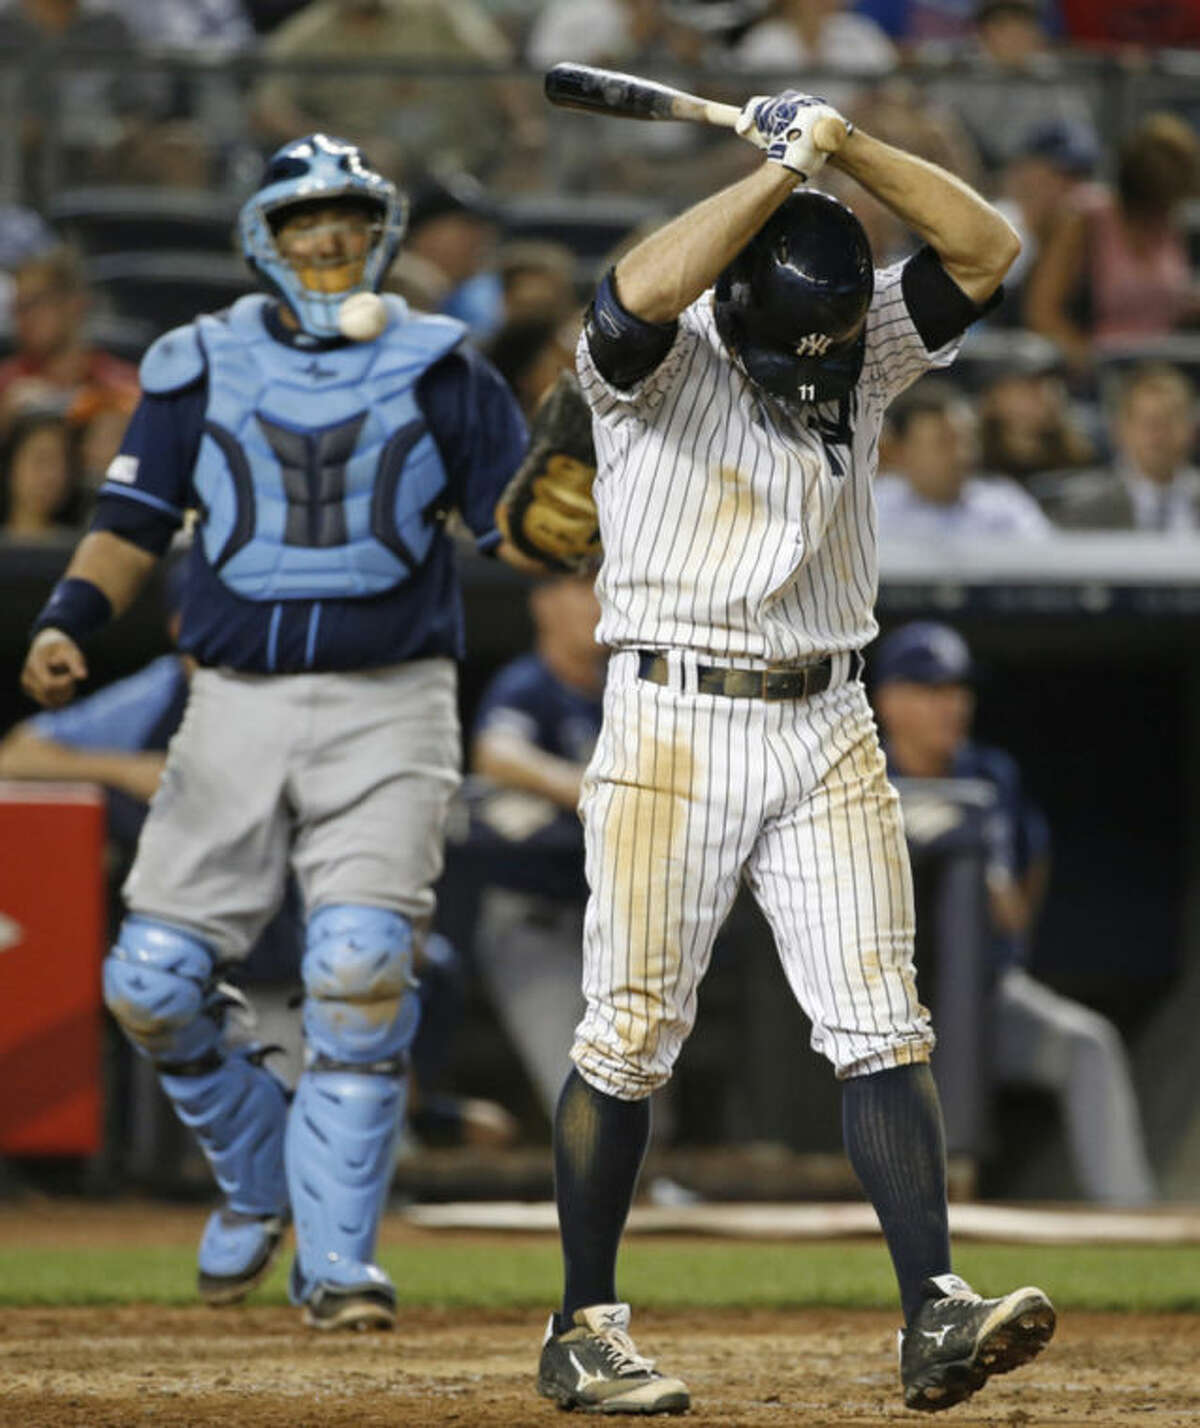 Tampa Bay Rays catcher Jose Molina, left, watches as New York Yankees Brett Gardner reacts after striking out with Yangervis Solarte at first base in a baseball game at Yankee Stadium in New York, Tuesday, July 1, 2014. (AP Photo/Kathy Willens)